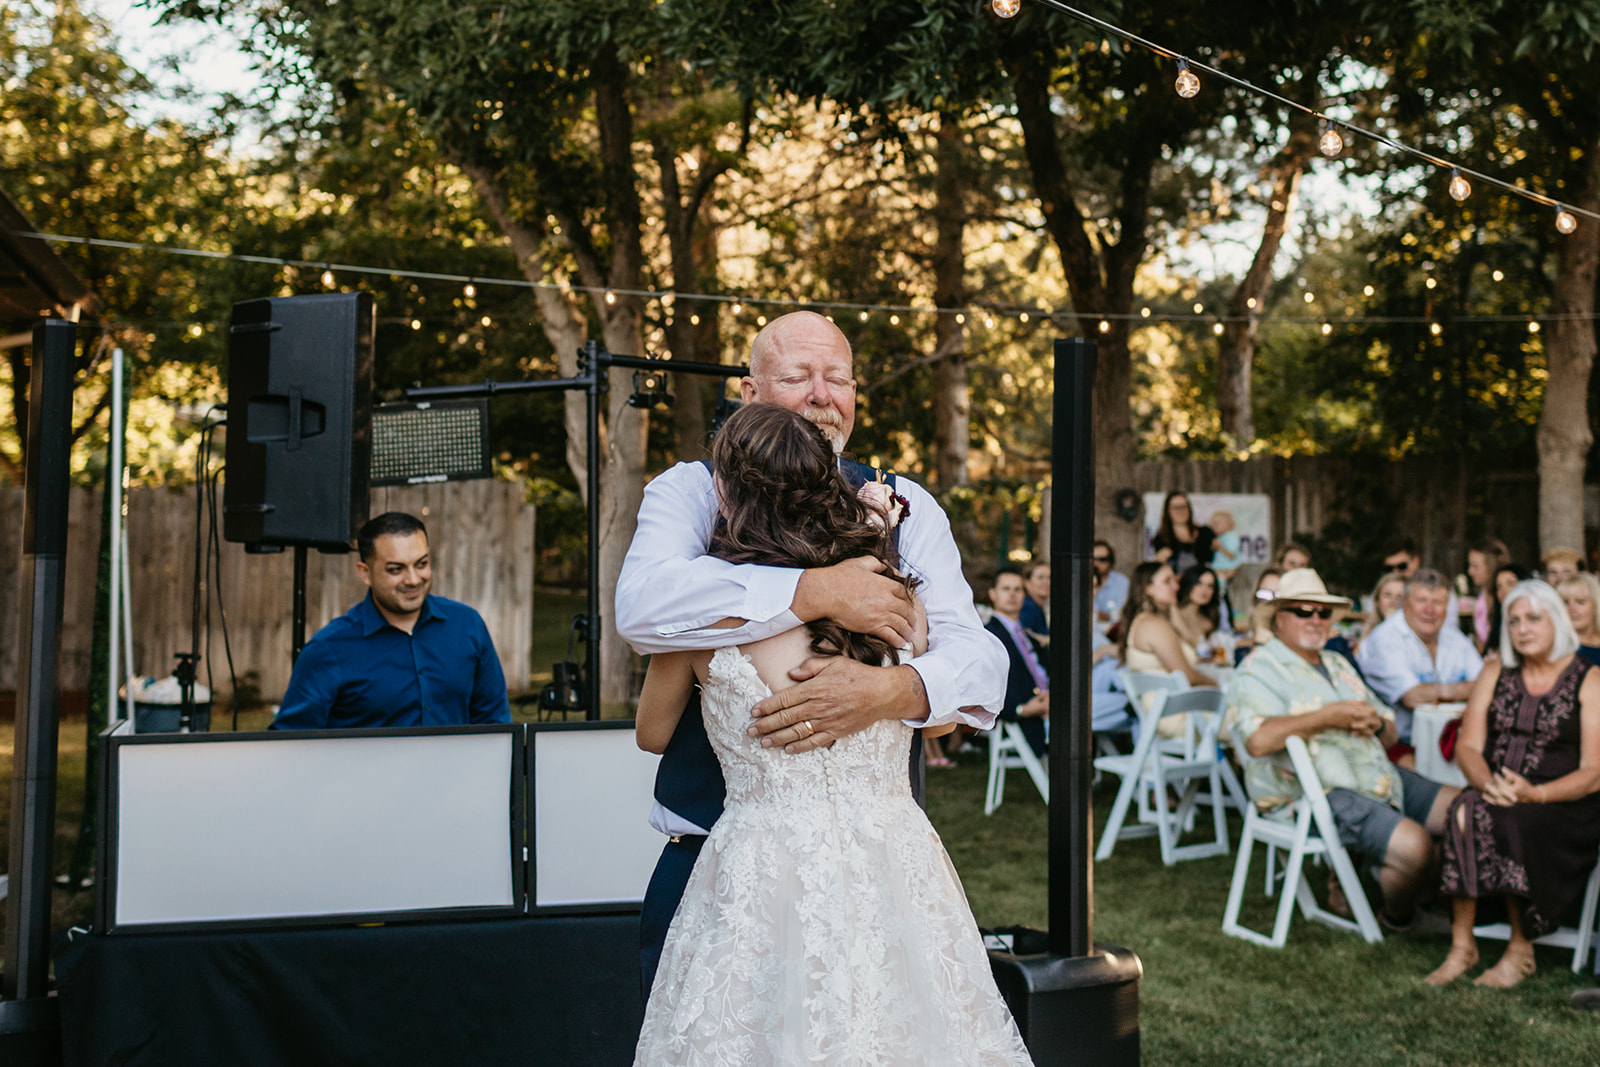 Father daughter dance at wedding